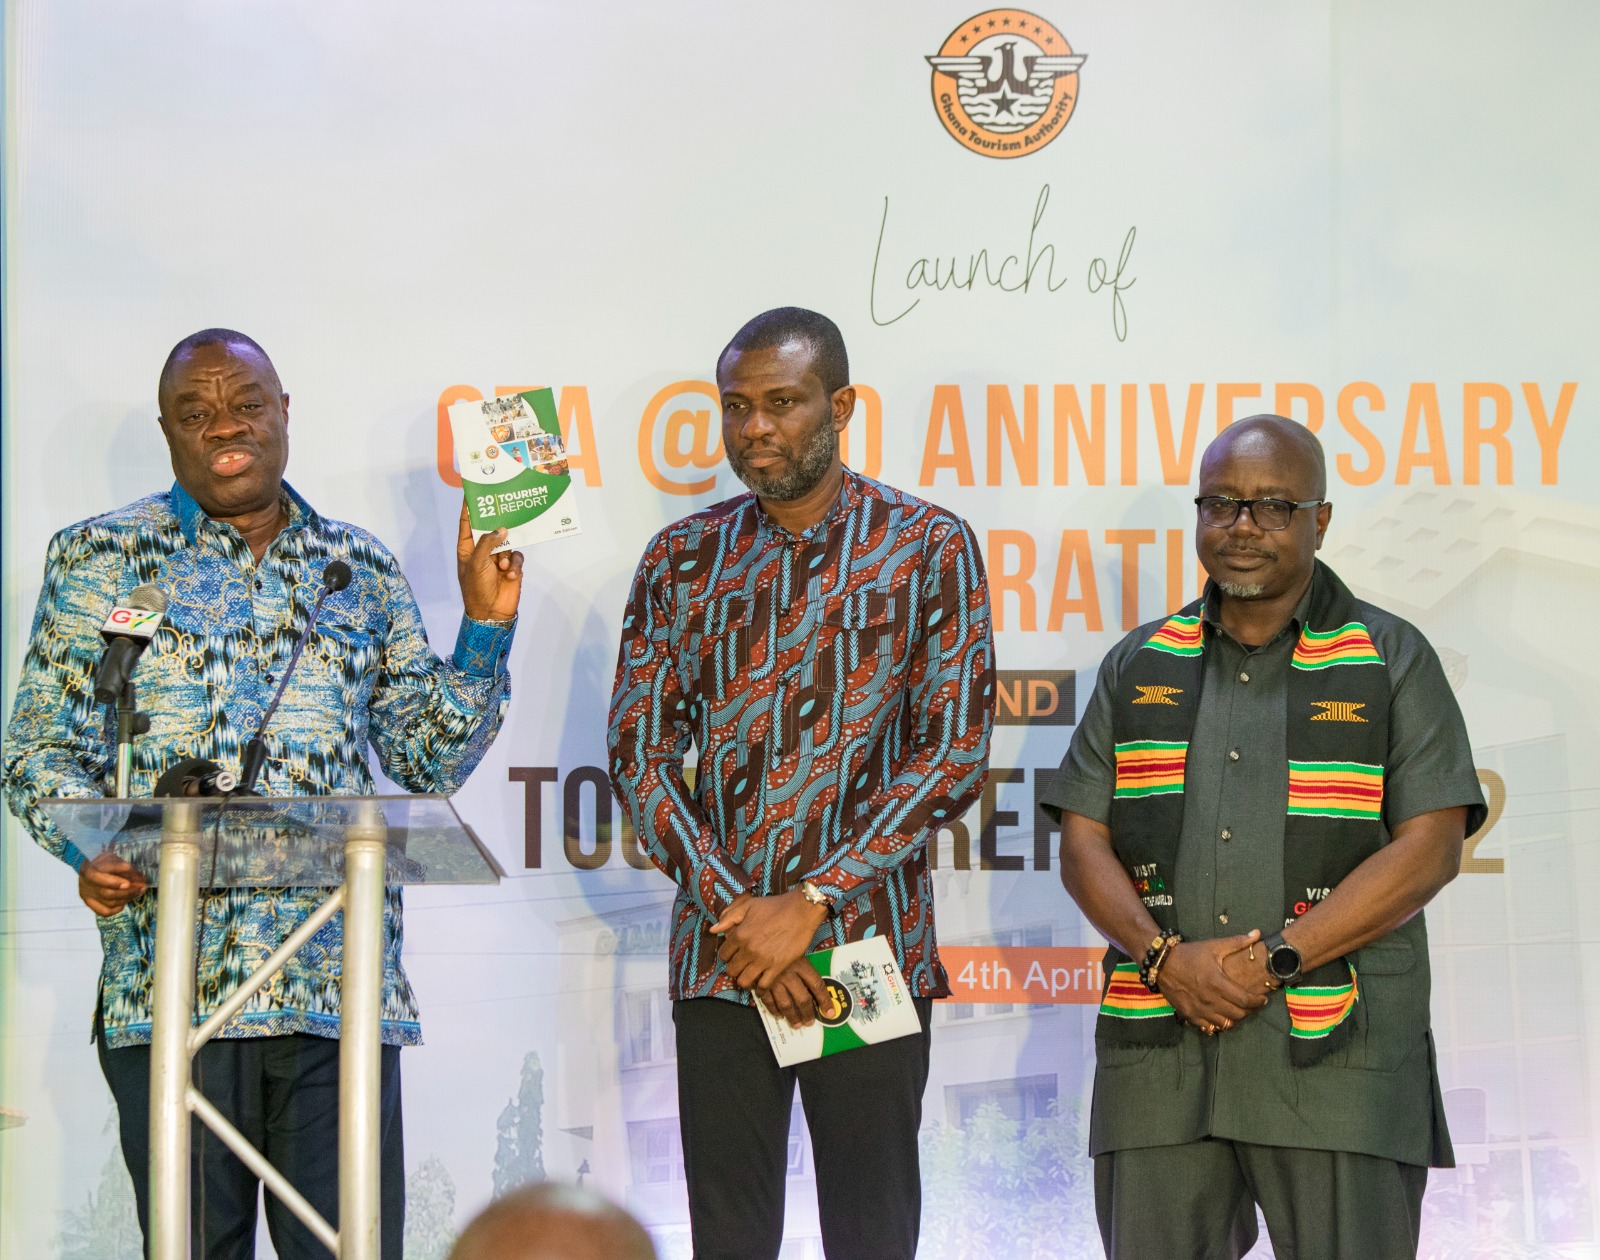 Ghana Tourism Authority set to celebrate 50 years with impressive growth in the sector